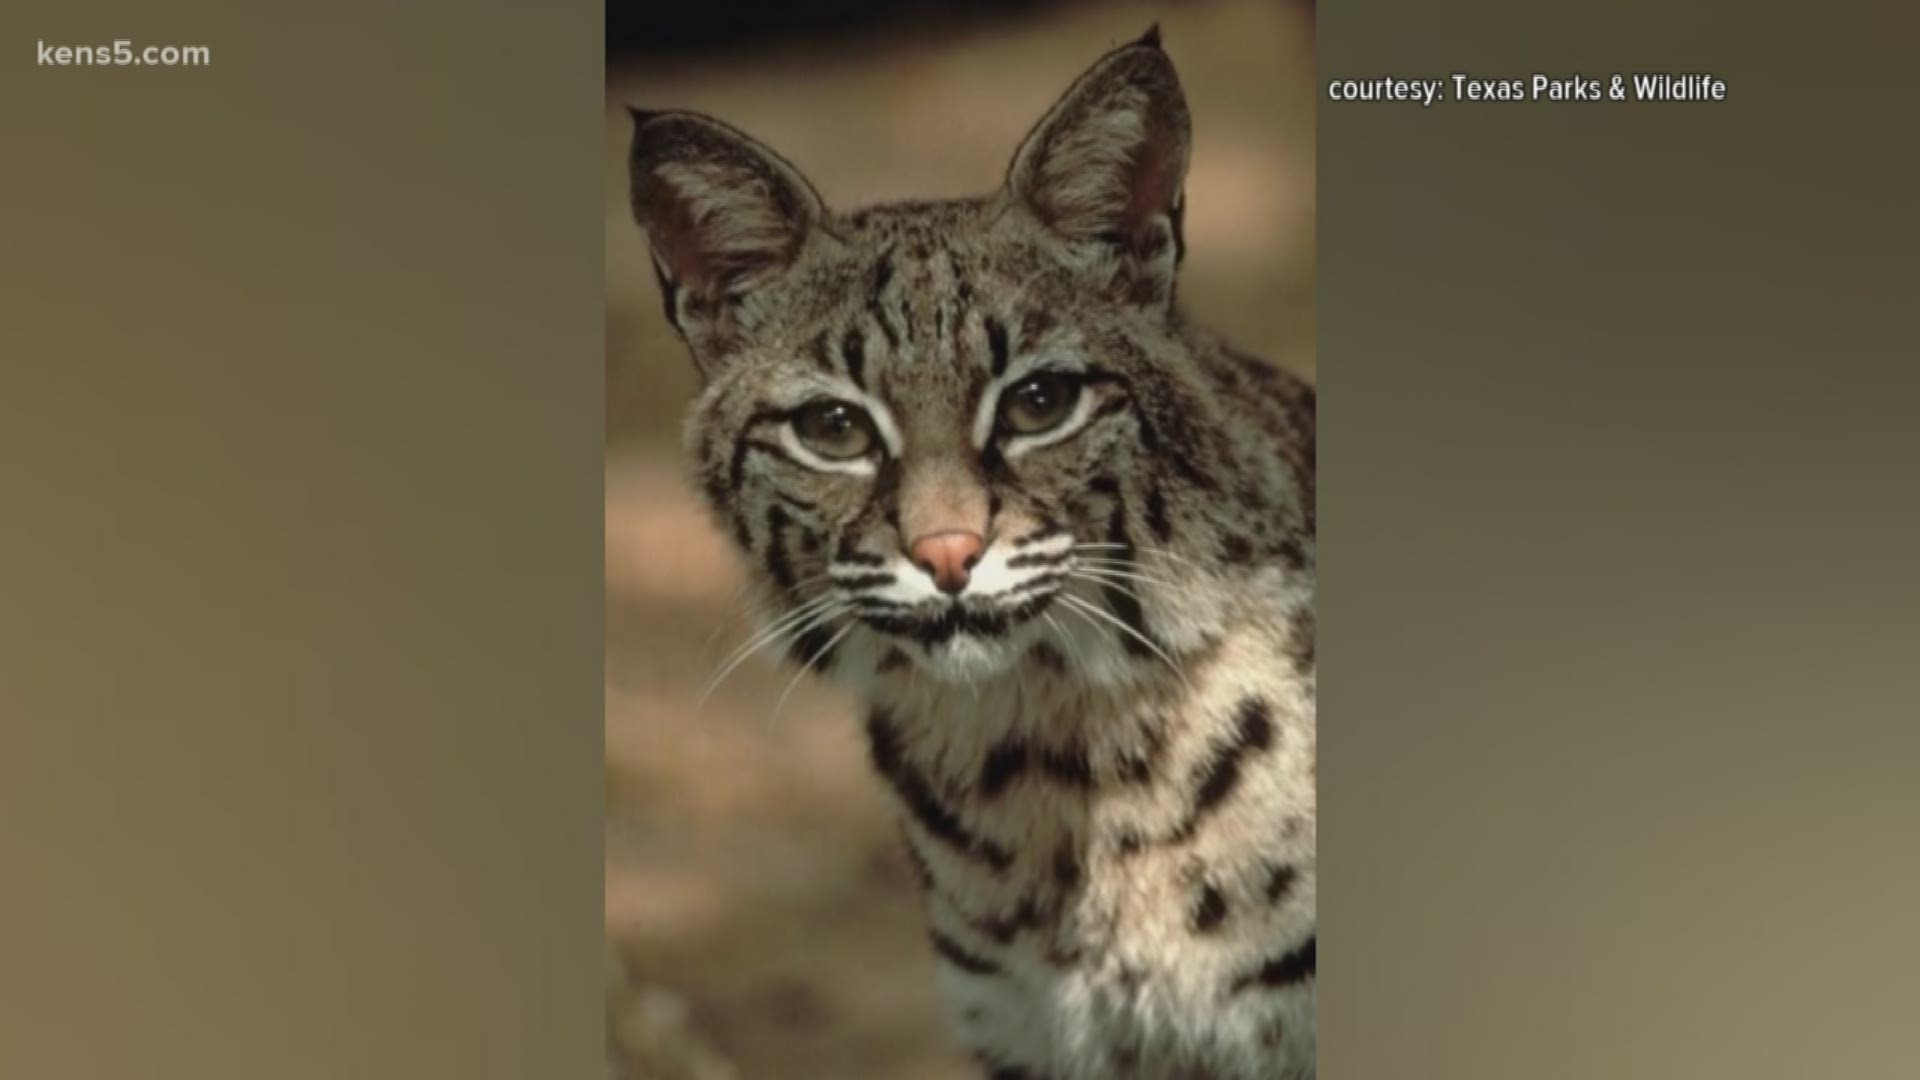 Aren't as common to see': Bobcats found dead on city's south sid 